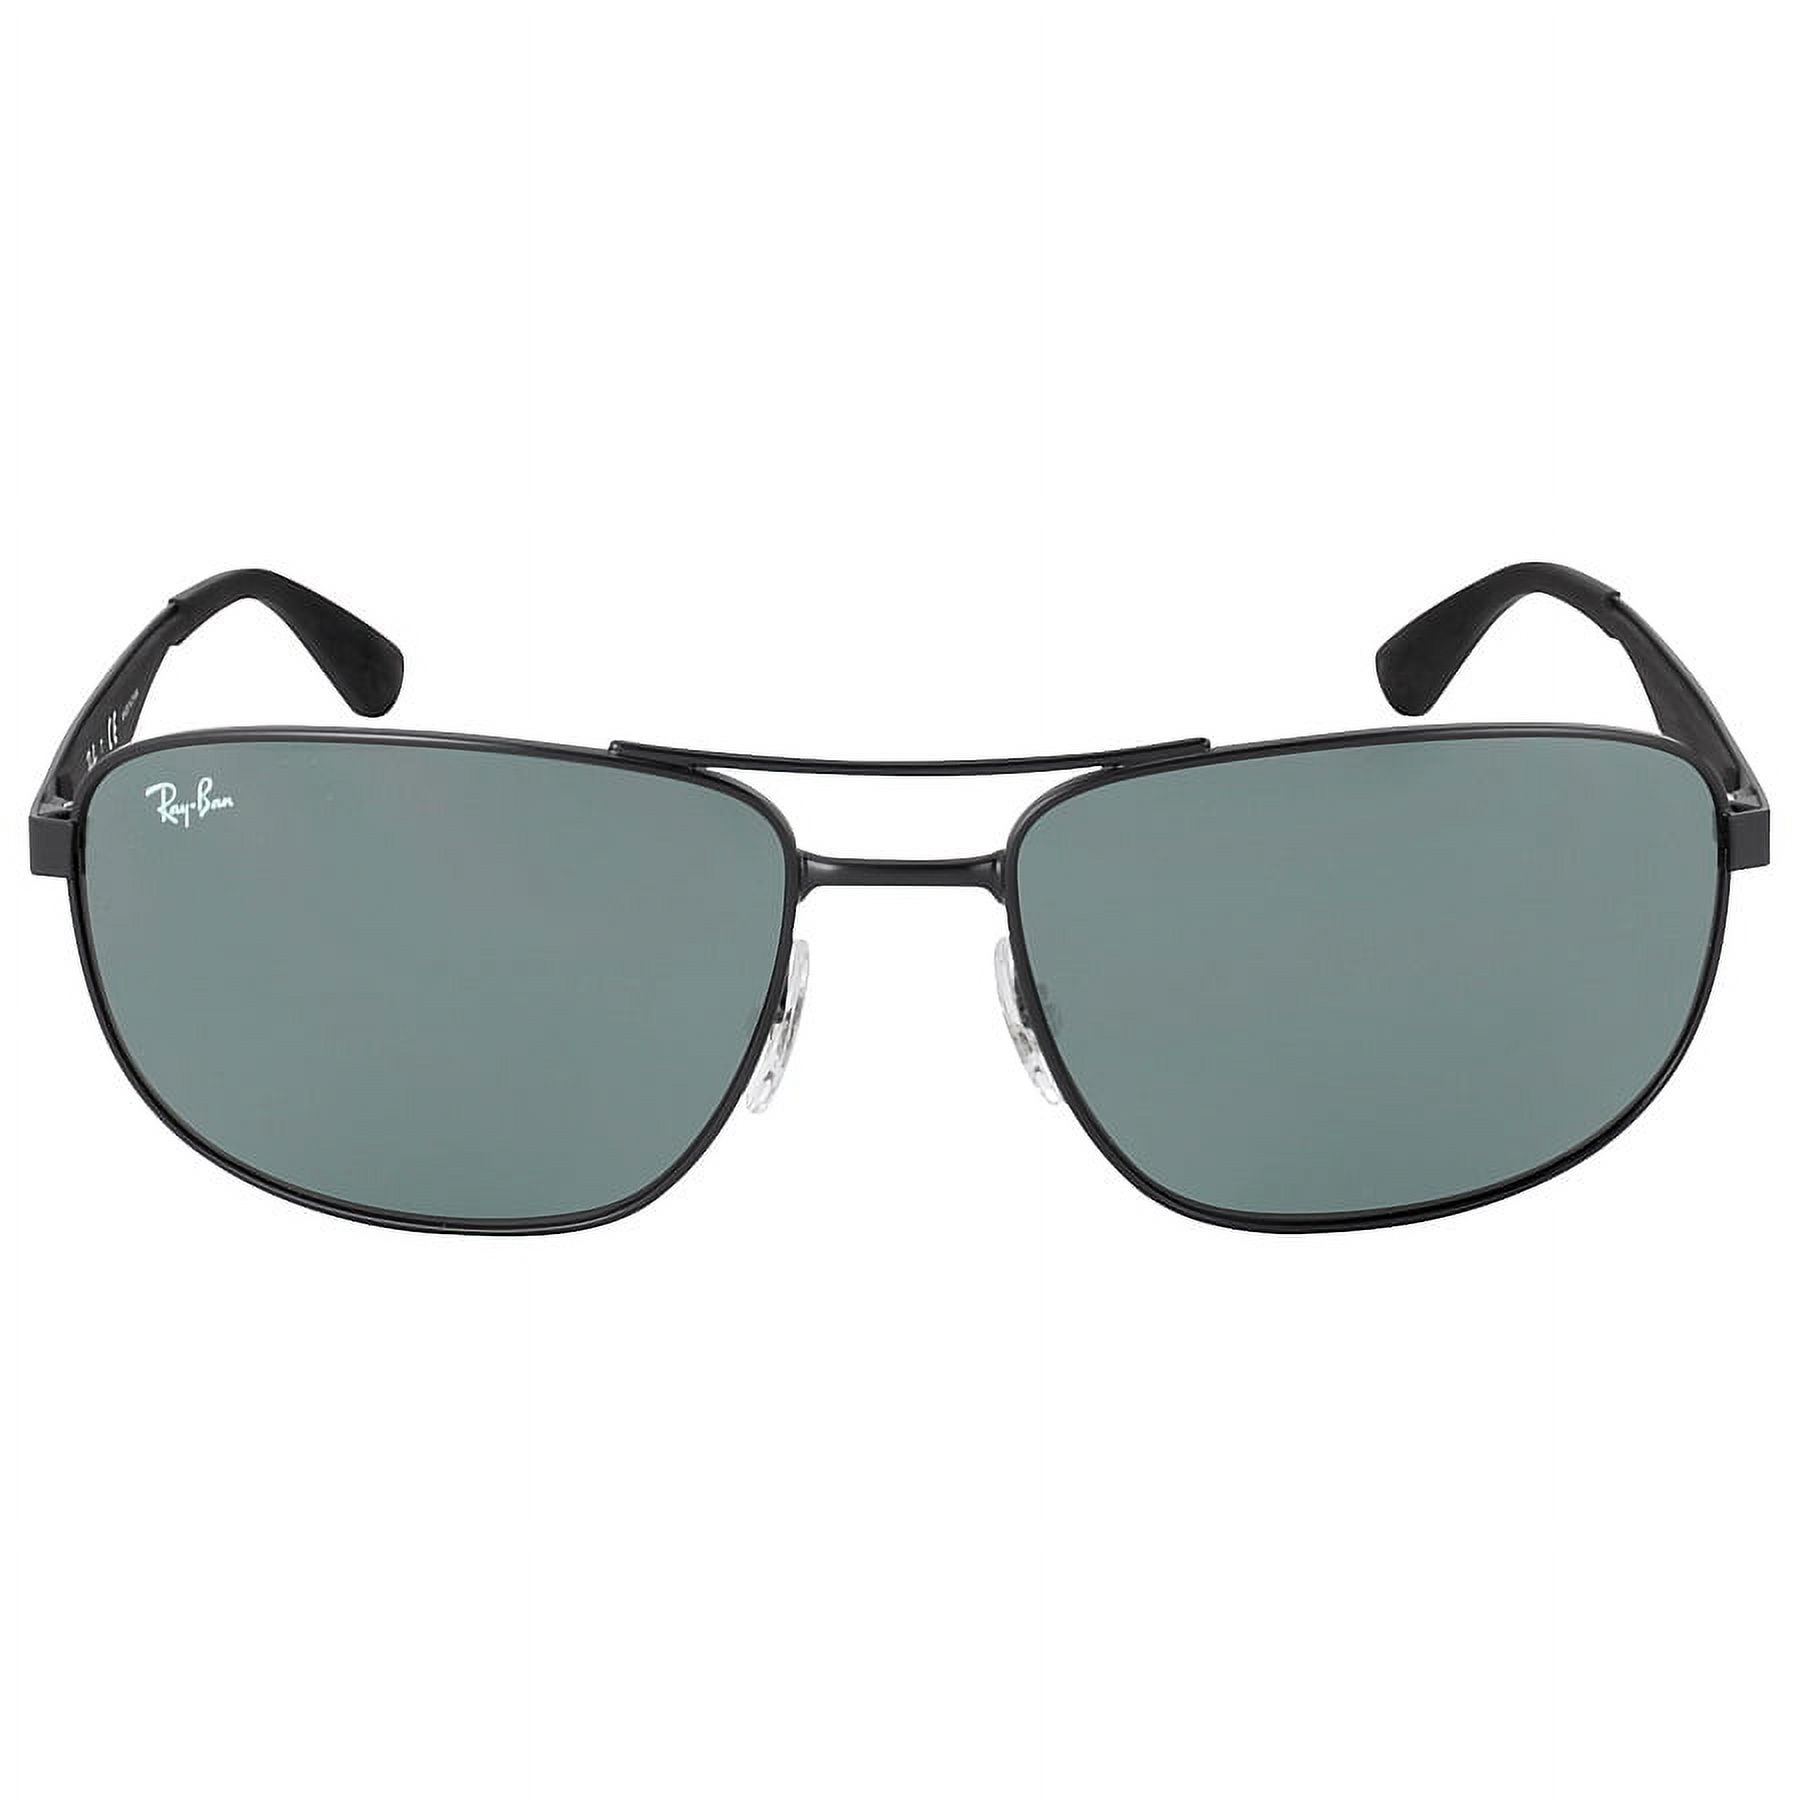 Ray Ban RB3528 Green Classic Sunglasses RB3528 006/71 61-17 - image 1 of 2